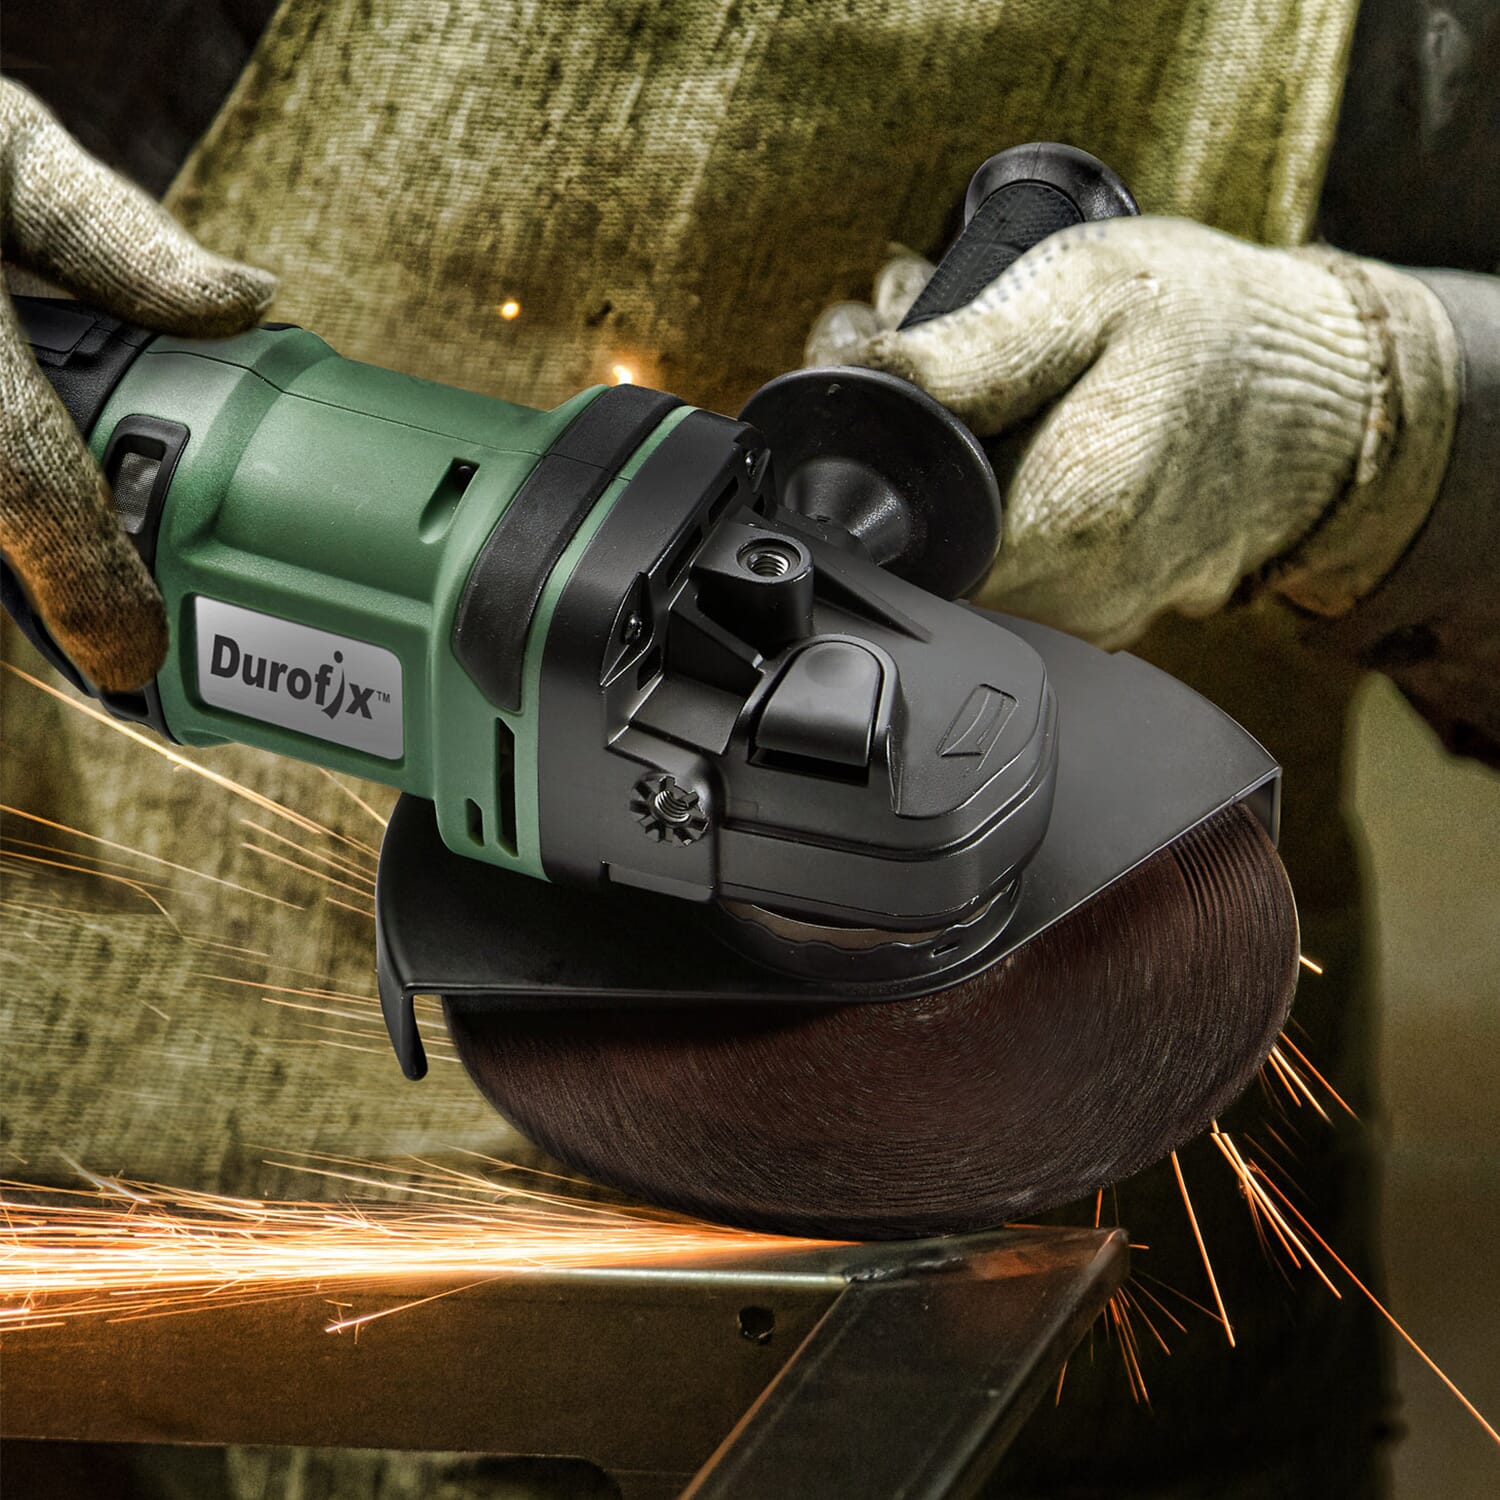 RG6020-230T Lithium-Ion 60V 9" Brushless Cordless Angle Grinder Power Tool - Tool Only